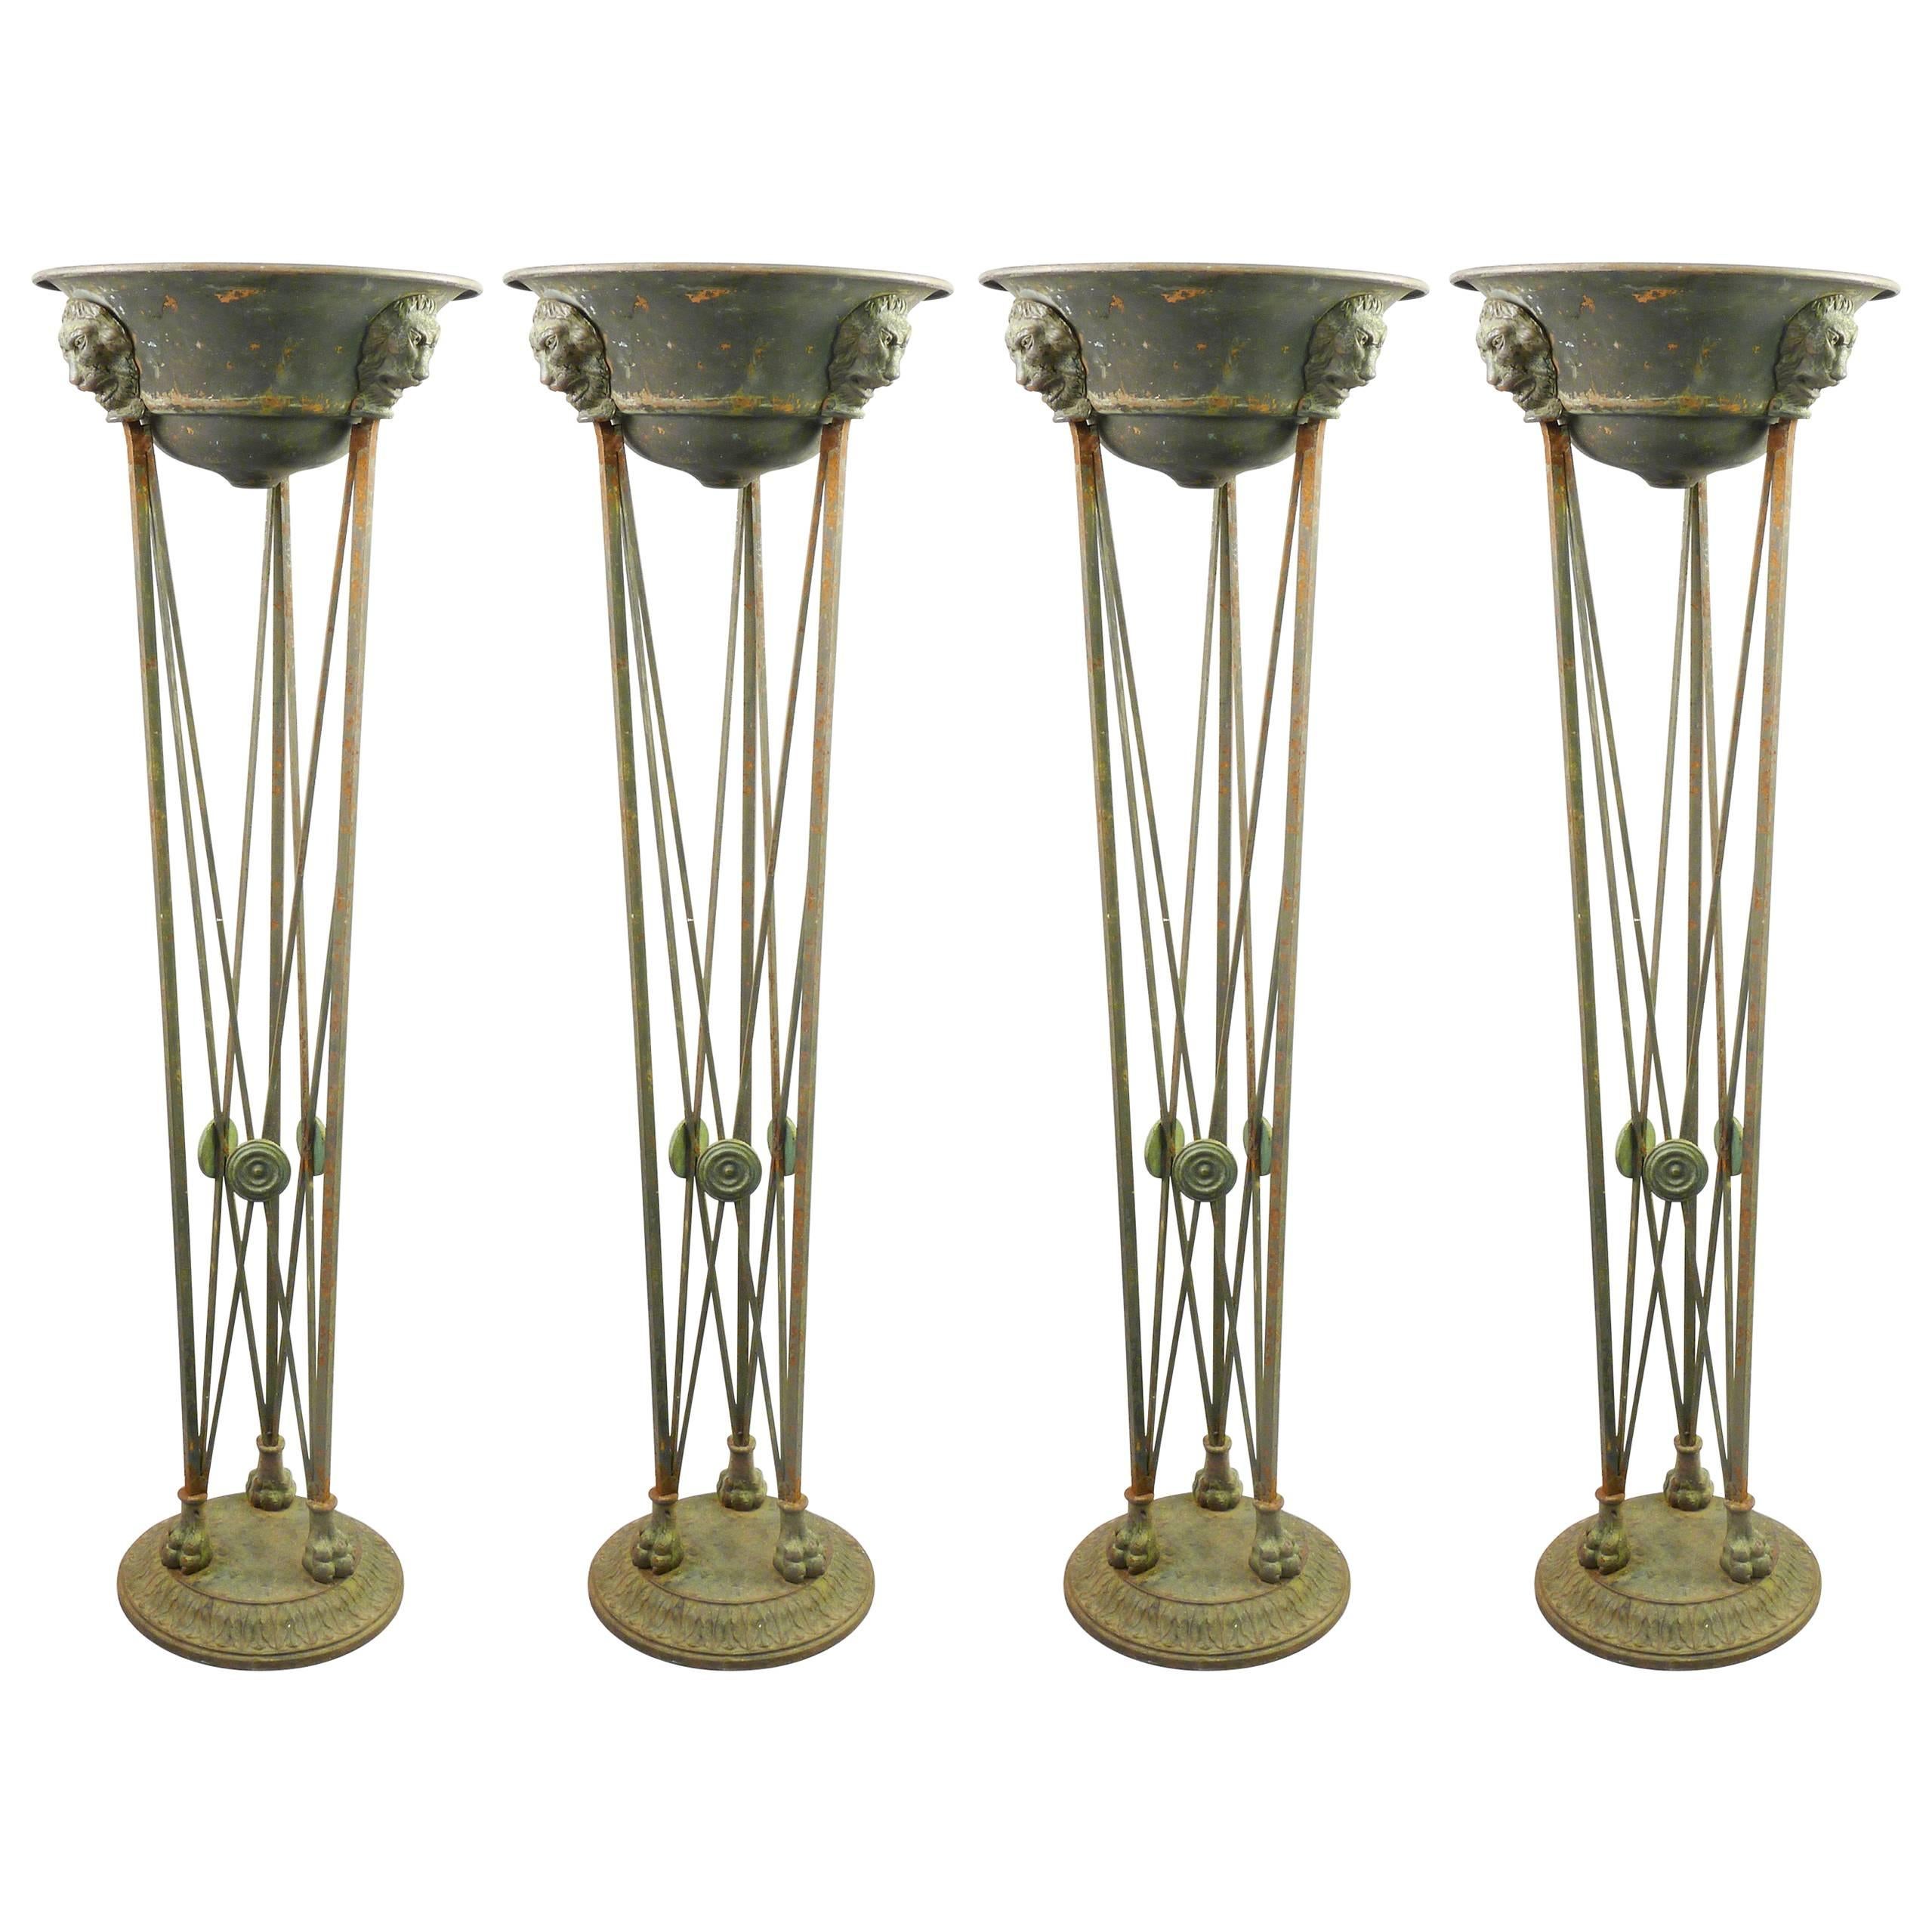 Italian Grand Tour Iron and Copper Torchiere Floor Lamps, Set of Four